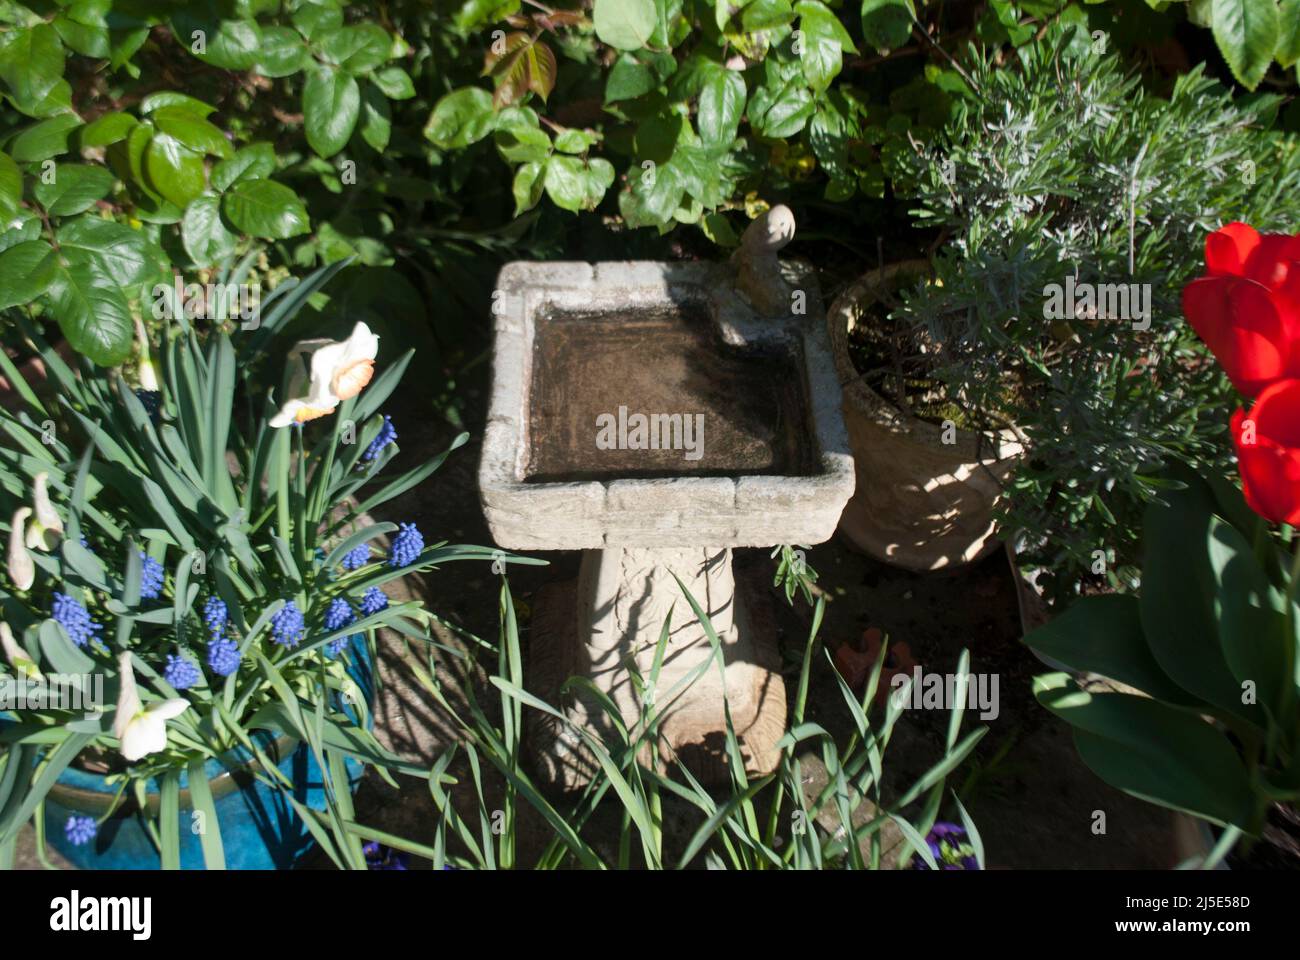 Stone bird bath surrounded by green plants and red tulips in garden in Ruskington, Sleaford, England, UK Stock Photo